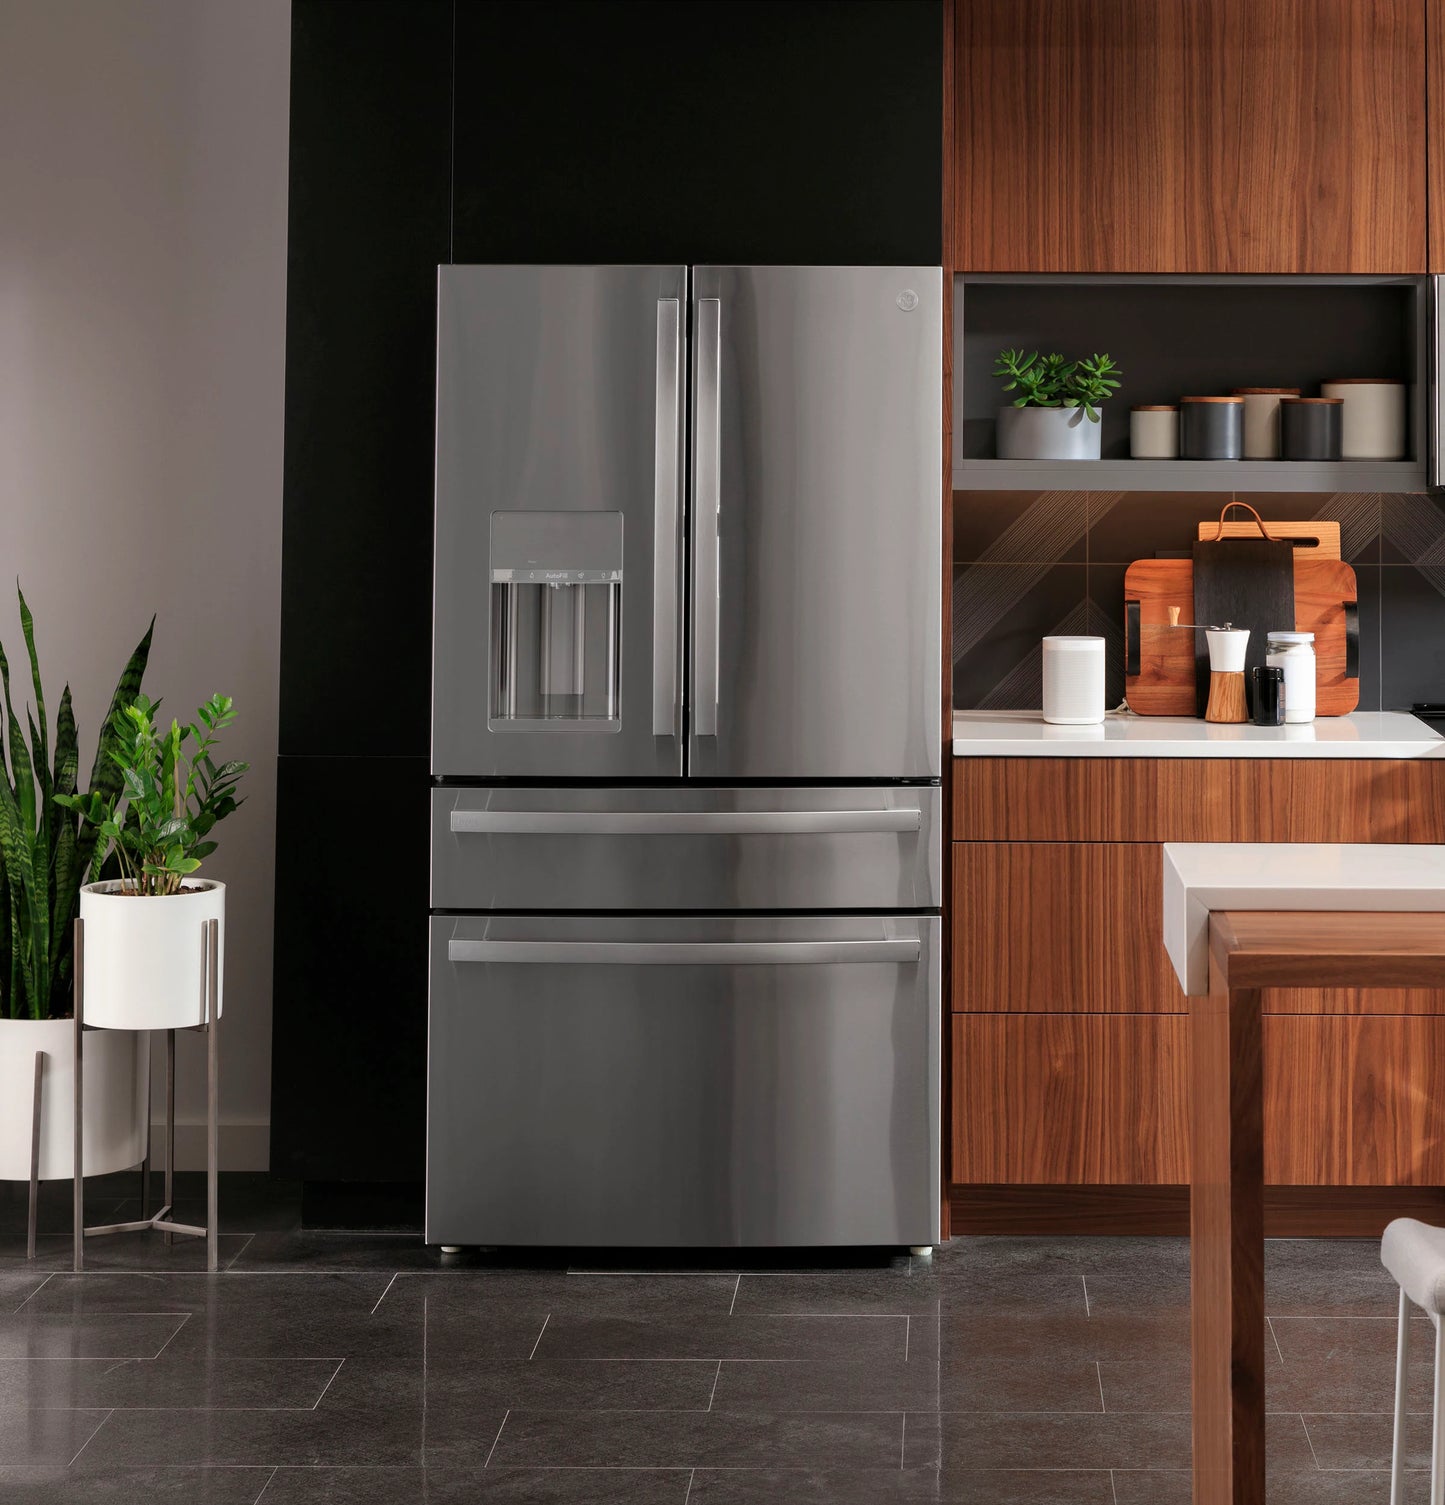 OPEN BOX GE Profile Smart 4-Door French Door Refrigerator & 30-in Double Wall Oven paired with 36-in Electric Cooktop Suite in Stainless Steel